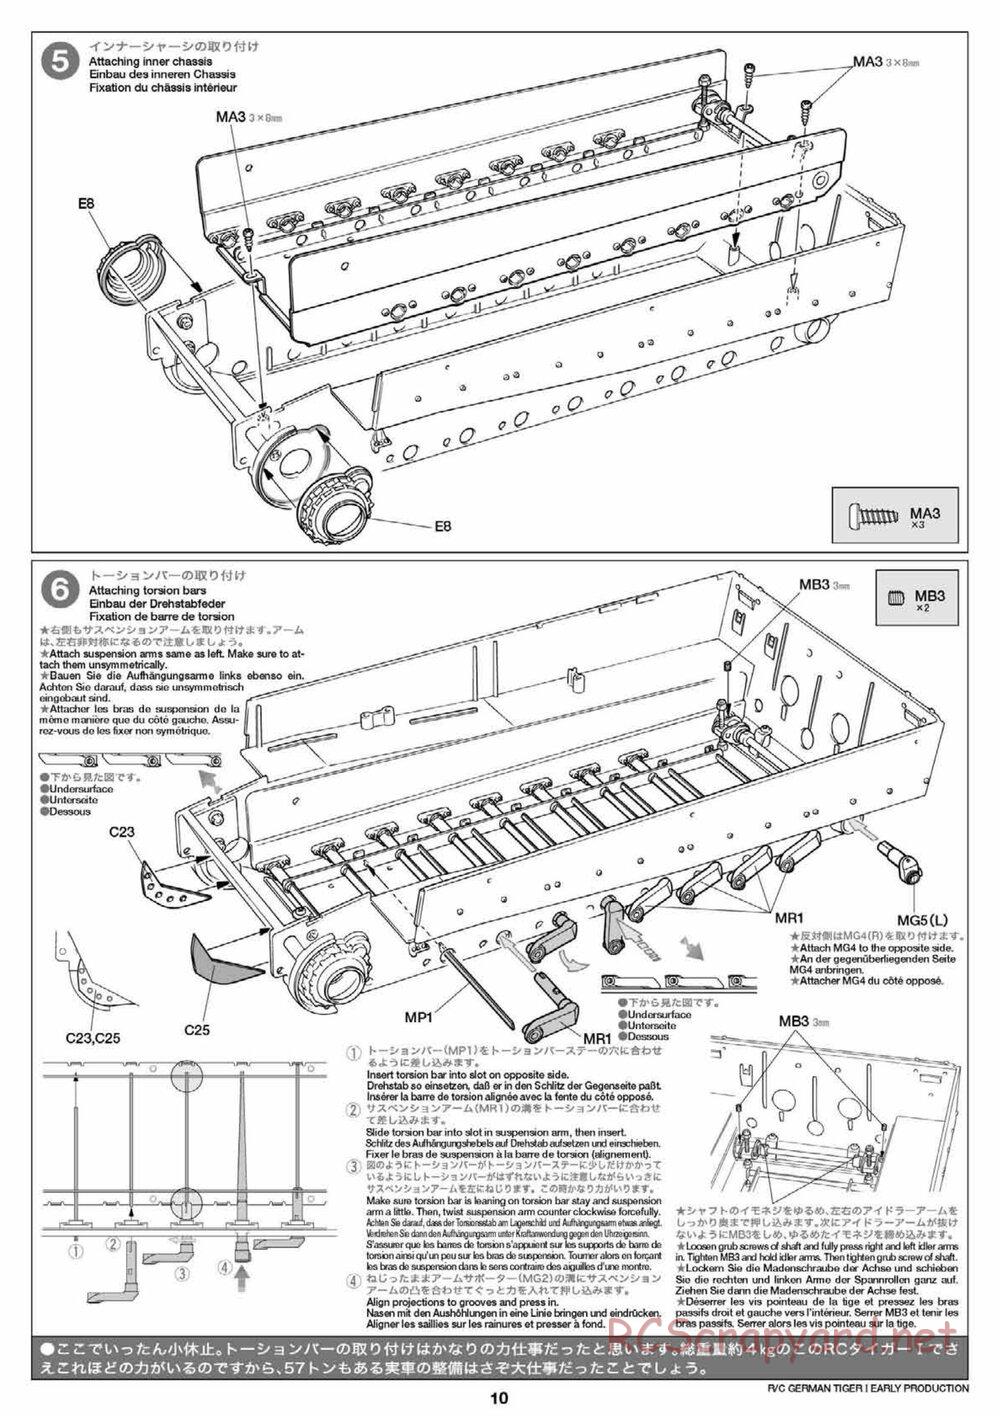 Tamiya - Tiger I Early Production - 1/16 Scale Chassis - Manual - Page 10